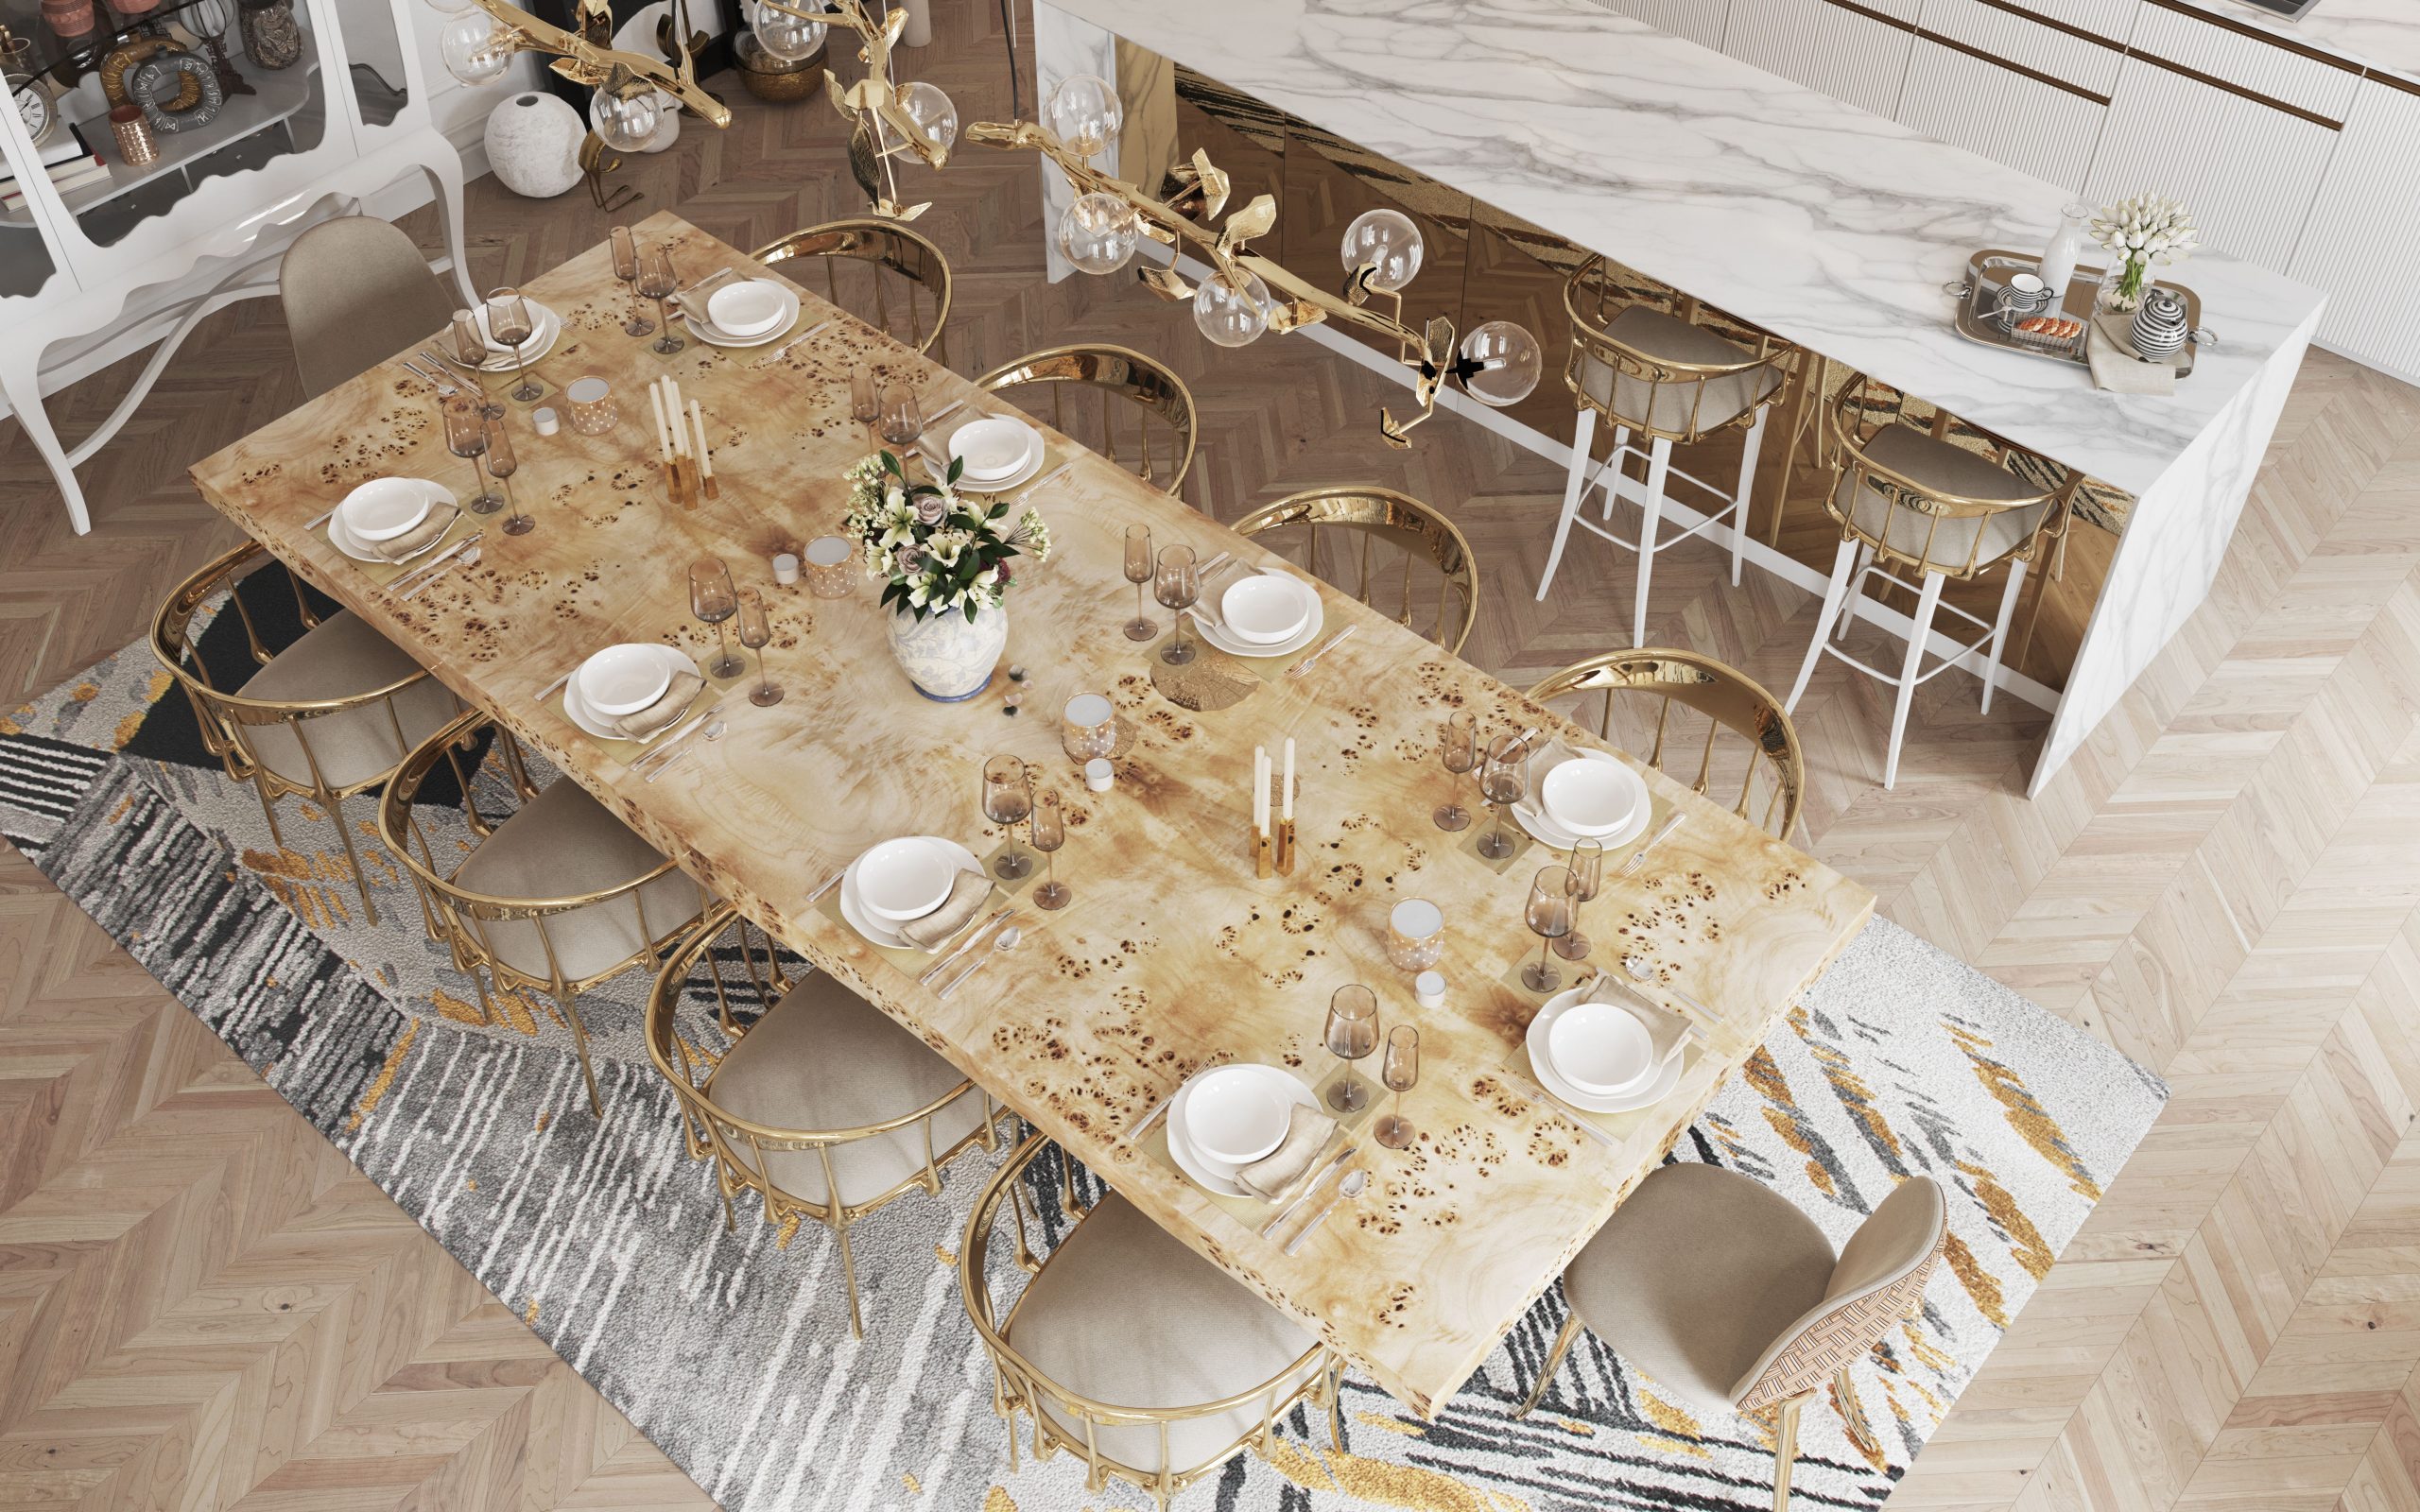 Studia 54 - A Glimpse Of Dining Luxury with this dining room with a golden aesthetic